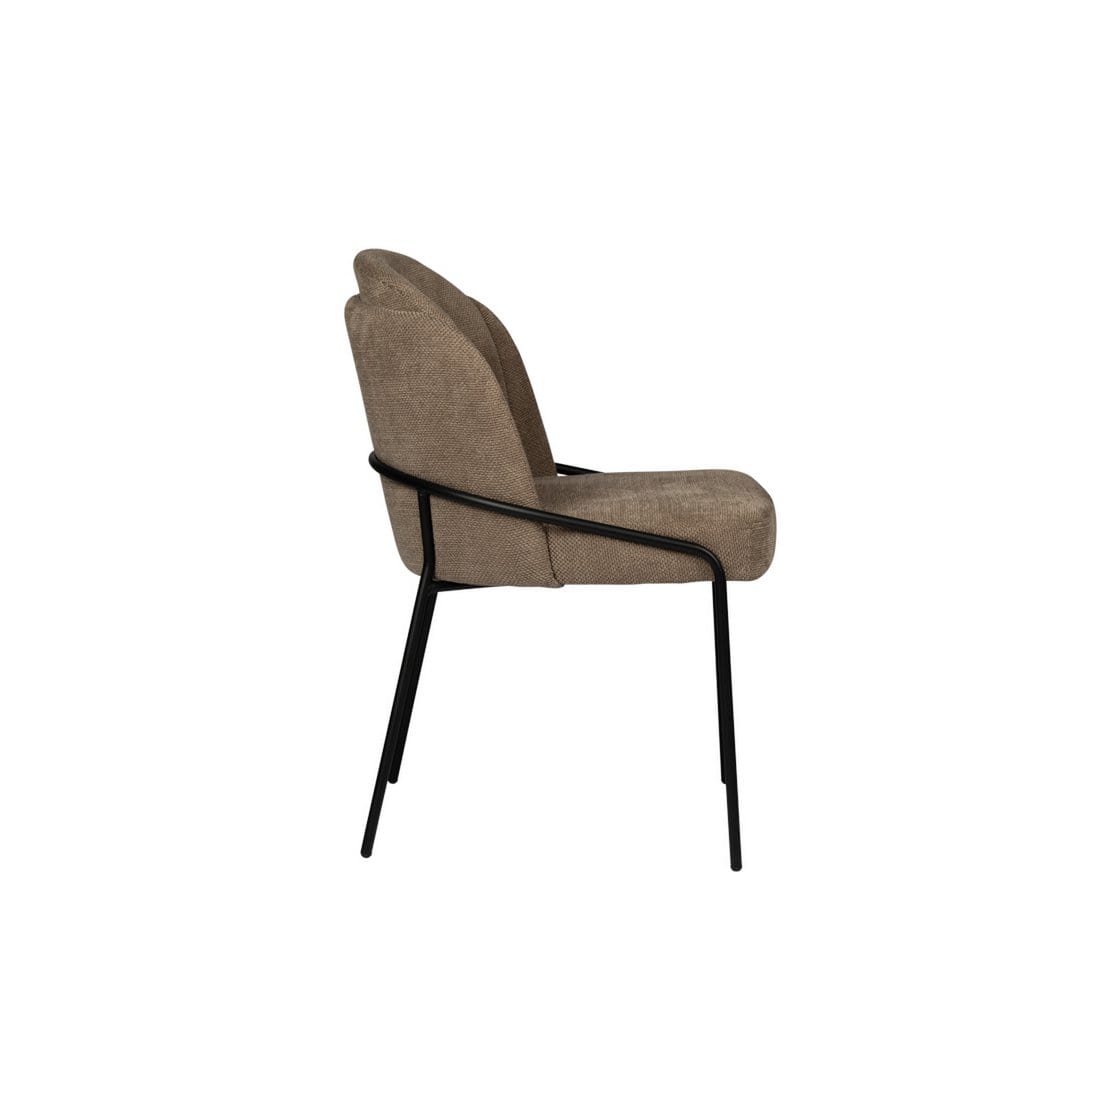 Pole To Pole Fjord chair Brown (Set of 2)